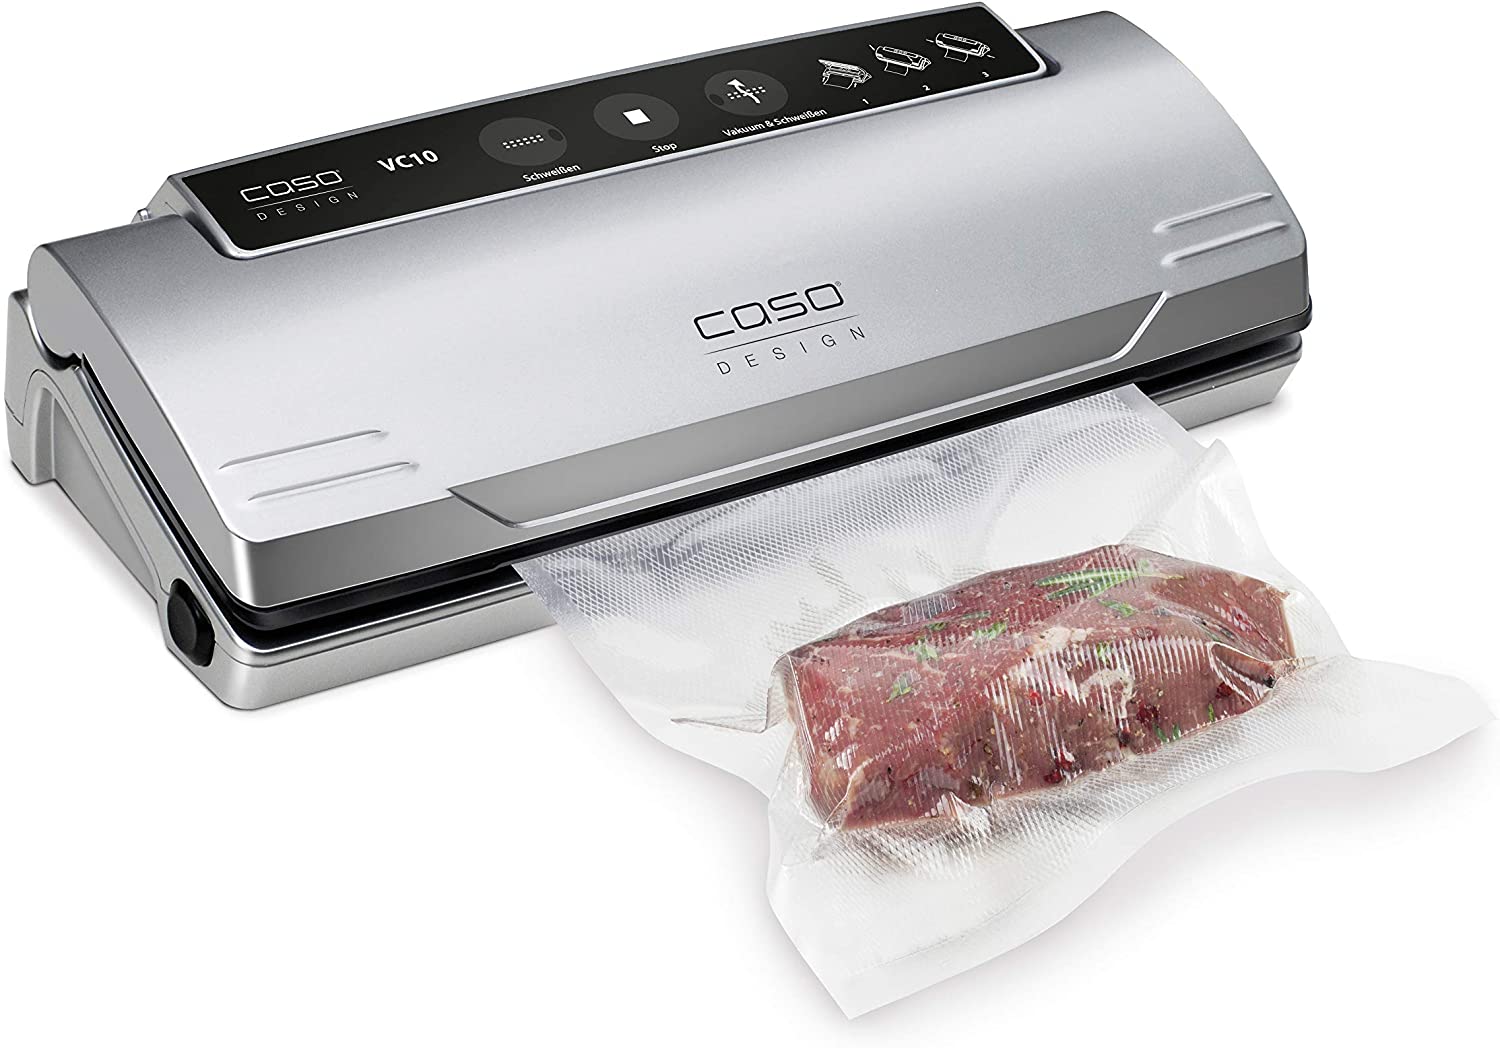 CASO VC10 vacuum sealer - test winner at Stiftung Warentest, vacuum sealer, food remains vacuumed up to 8x longer fresh, 30cm long & stable weld, including 10 professional foil bags